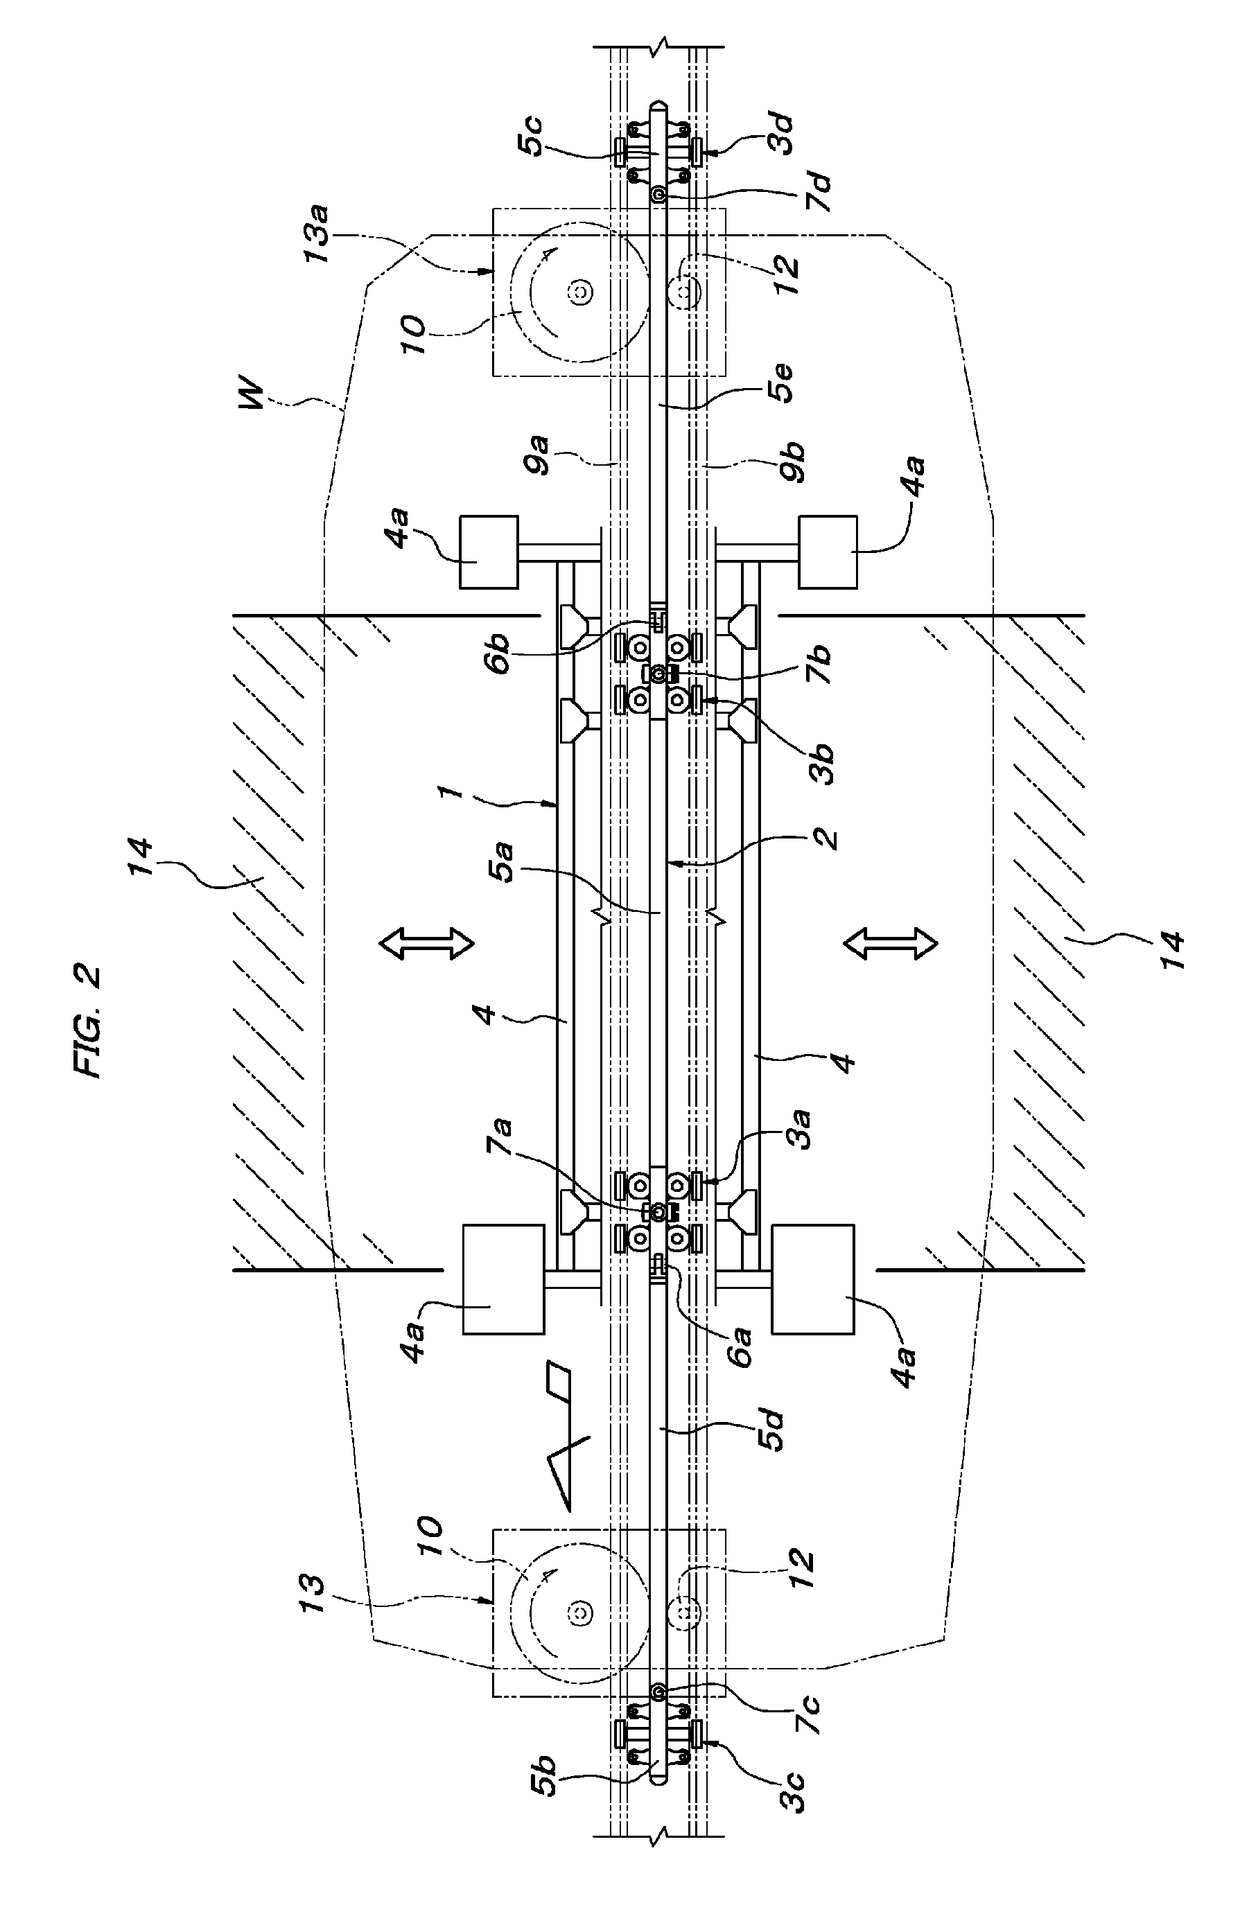 Traveling route structure of conveying traveling body